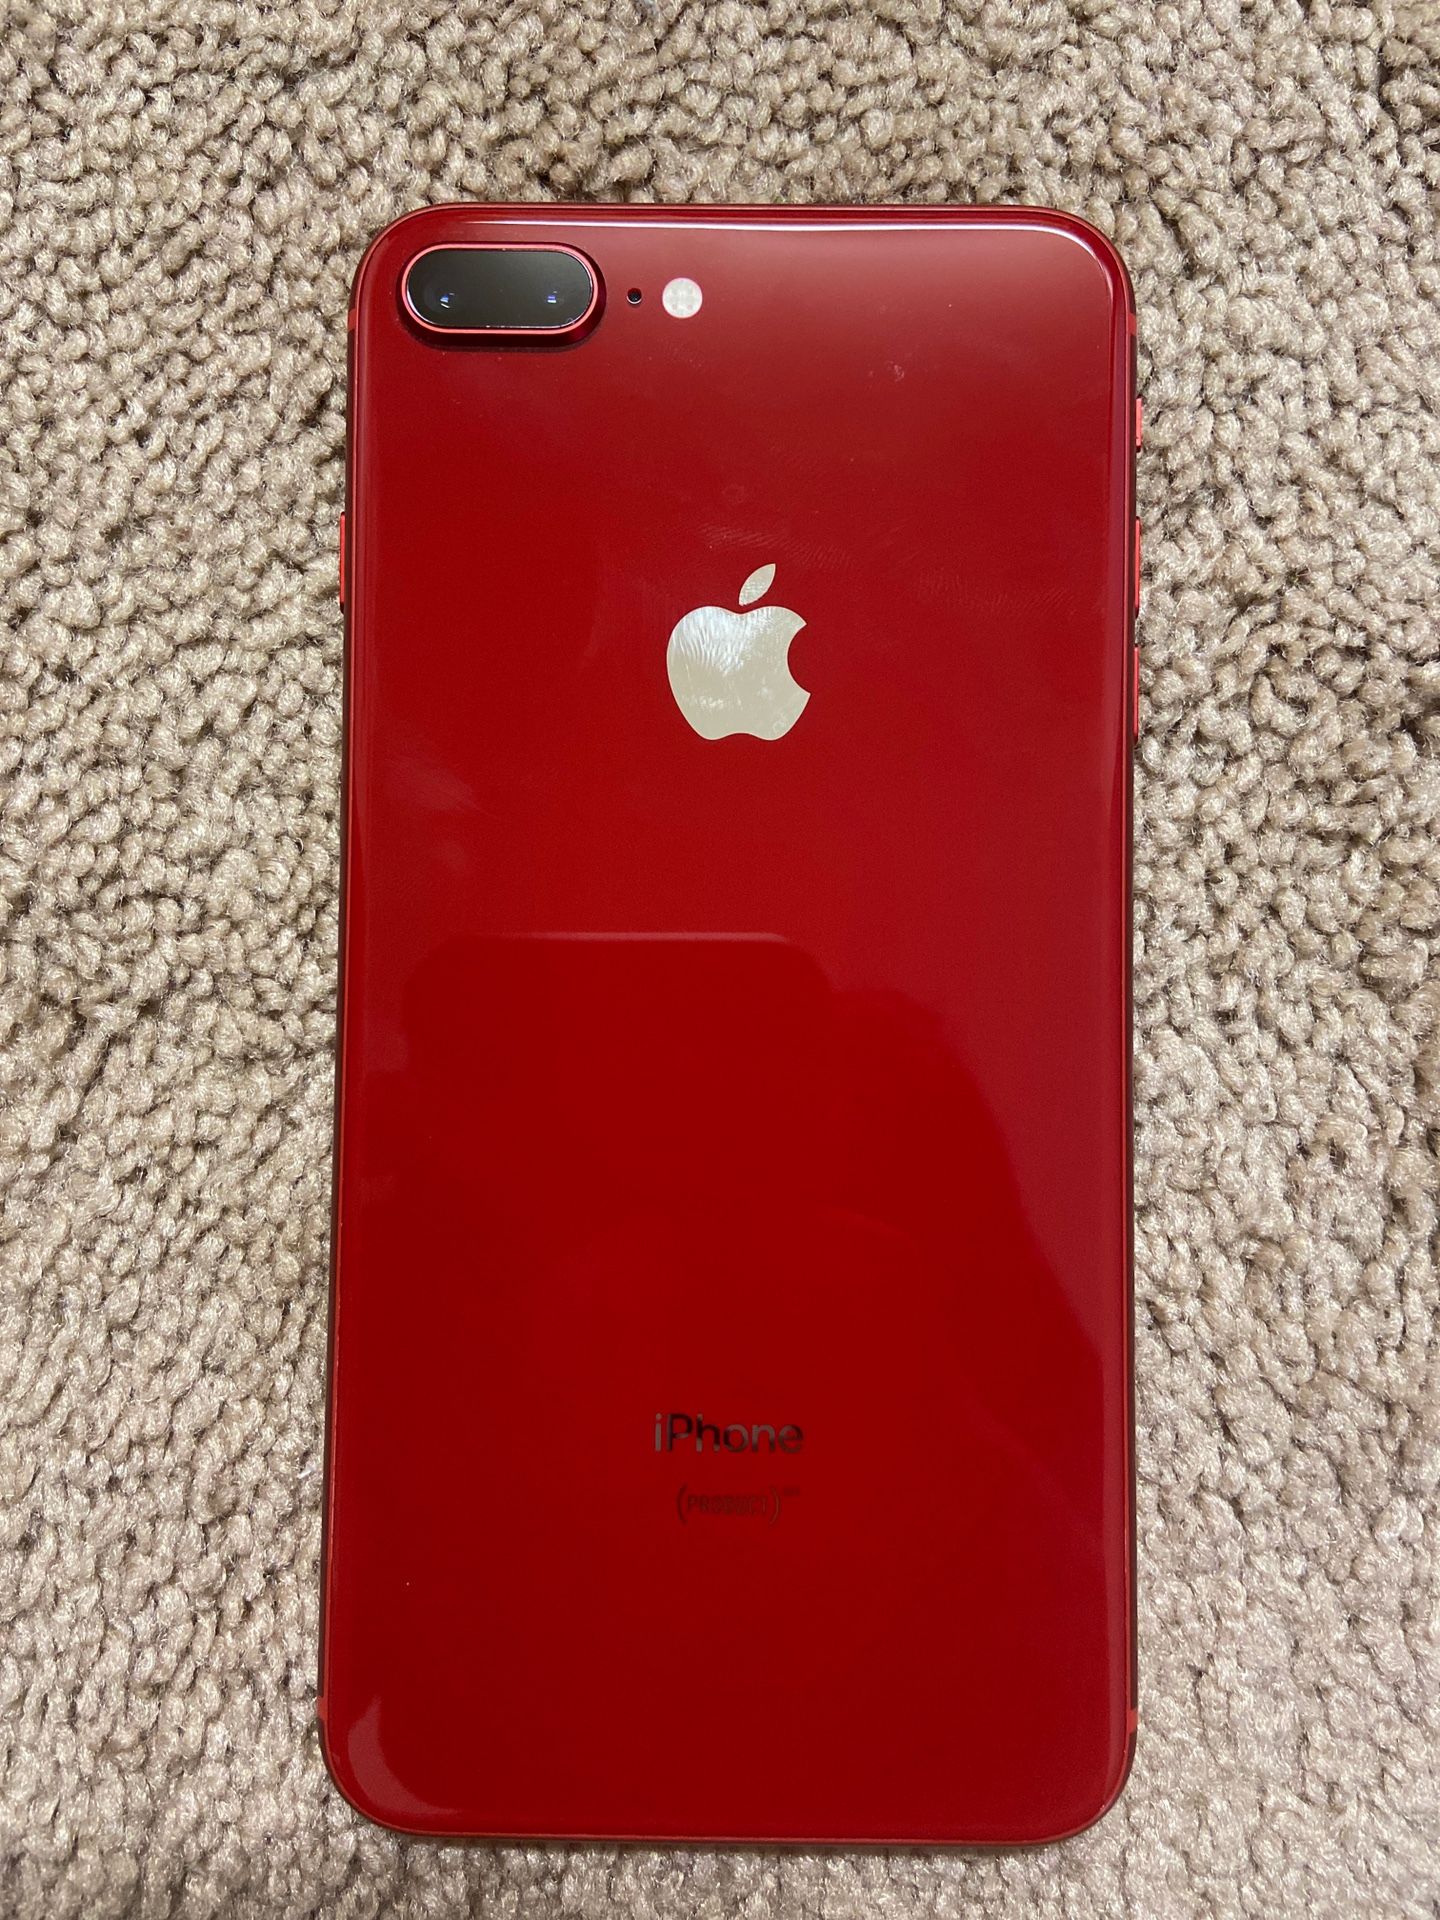 iPhone 8 64GB Product Red edition